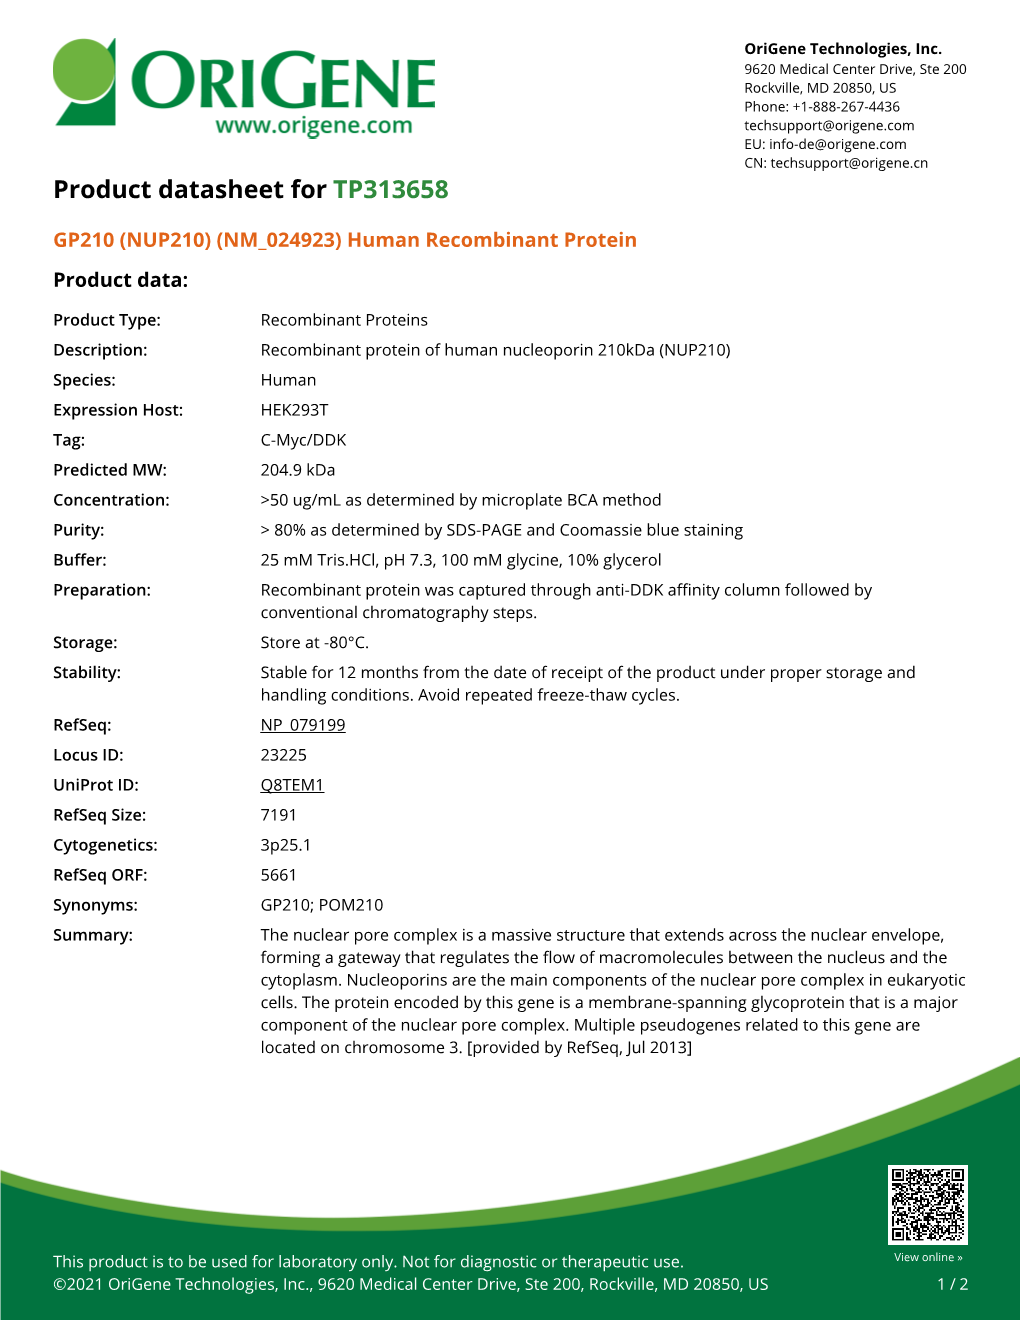 GP210 (NUP210) (NM 024923) Human Recombinant Protein Product Data